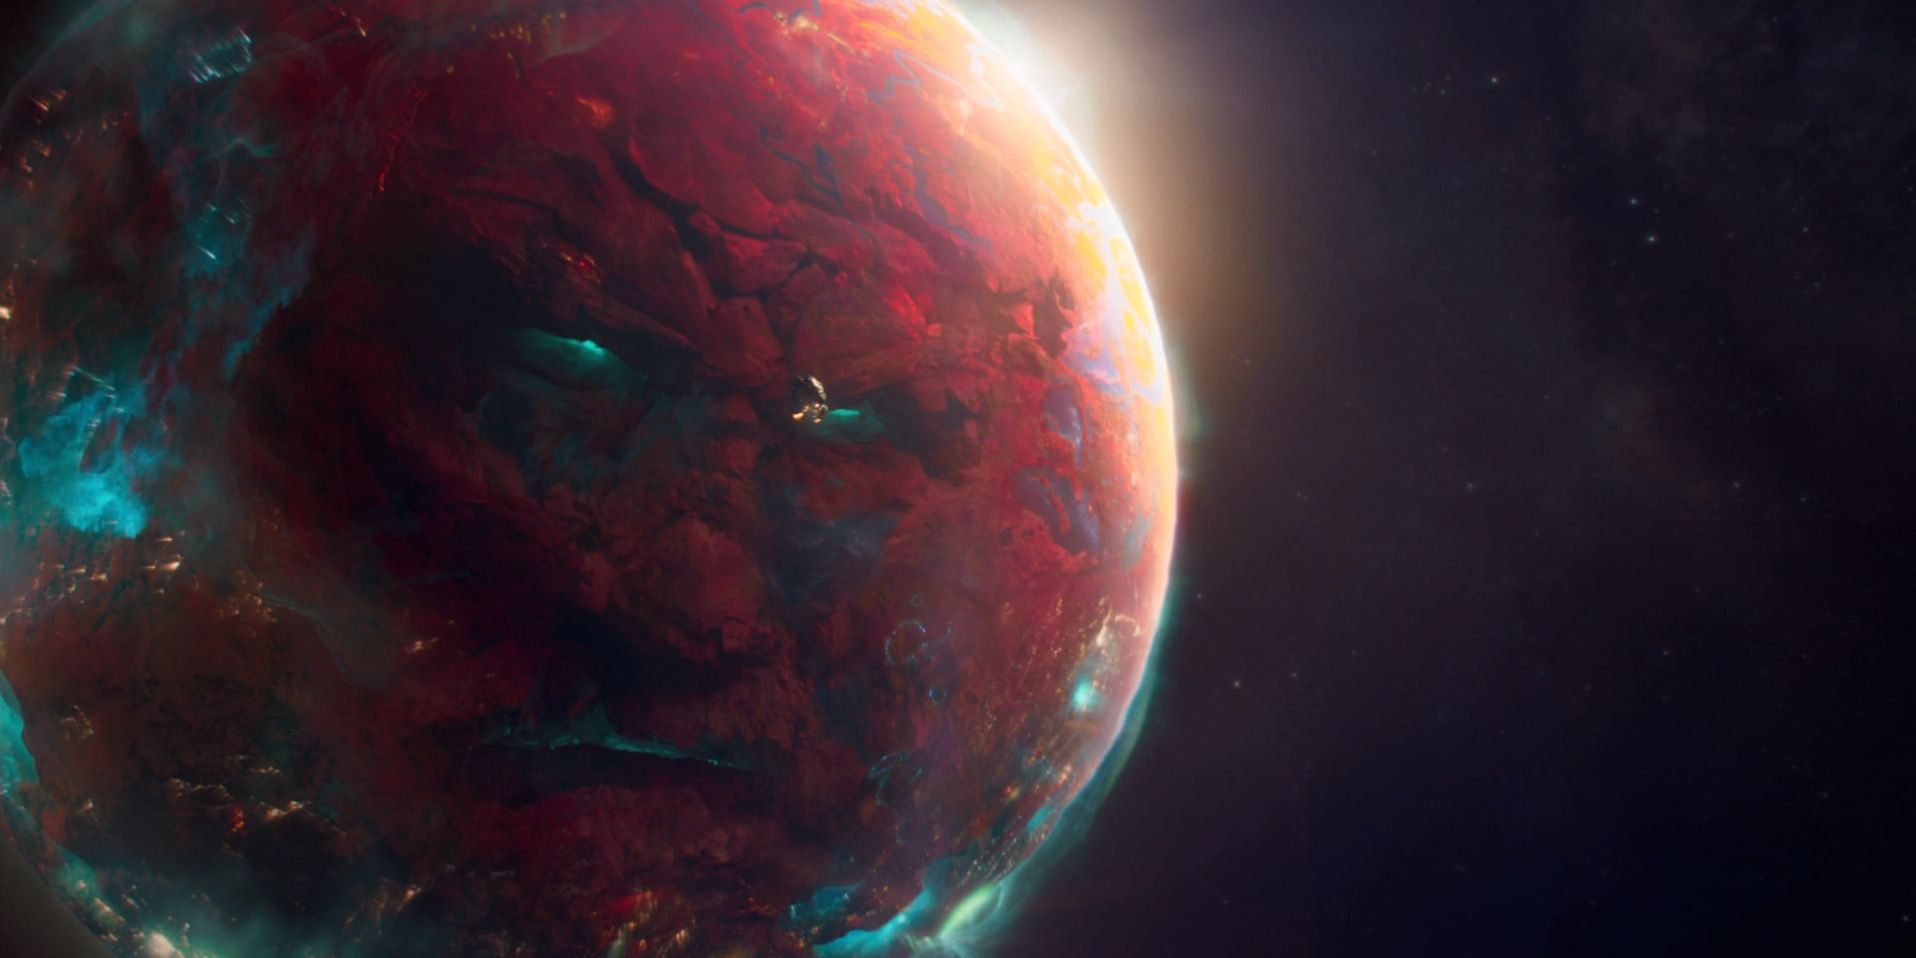 Ego the Living Planet from Guardians of the Galaxy Vol. 2